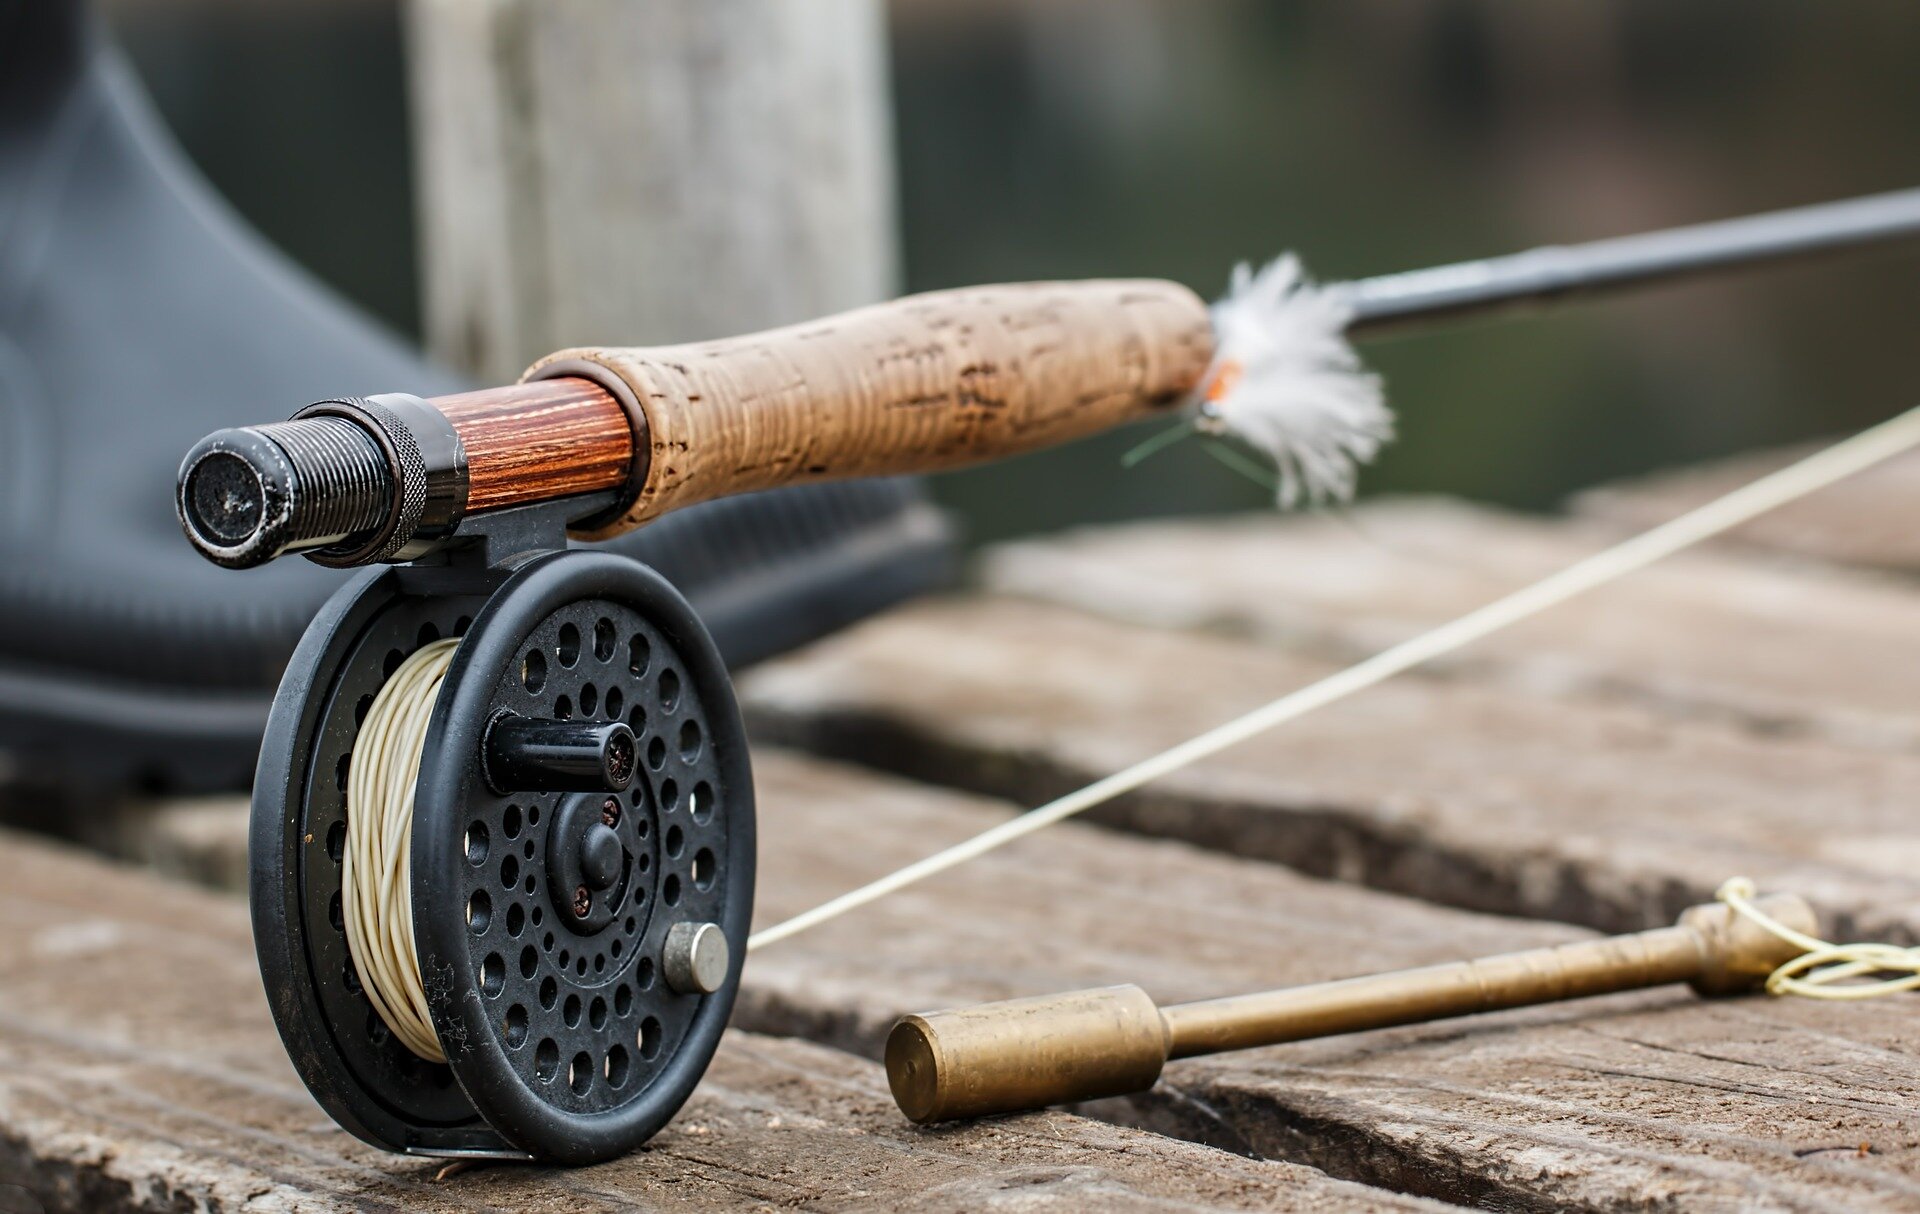 Game Fishing - Fly Fishing and Spinning Tackle - Angling Active